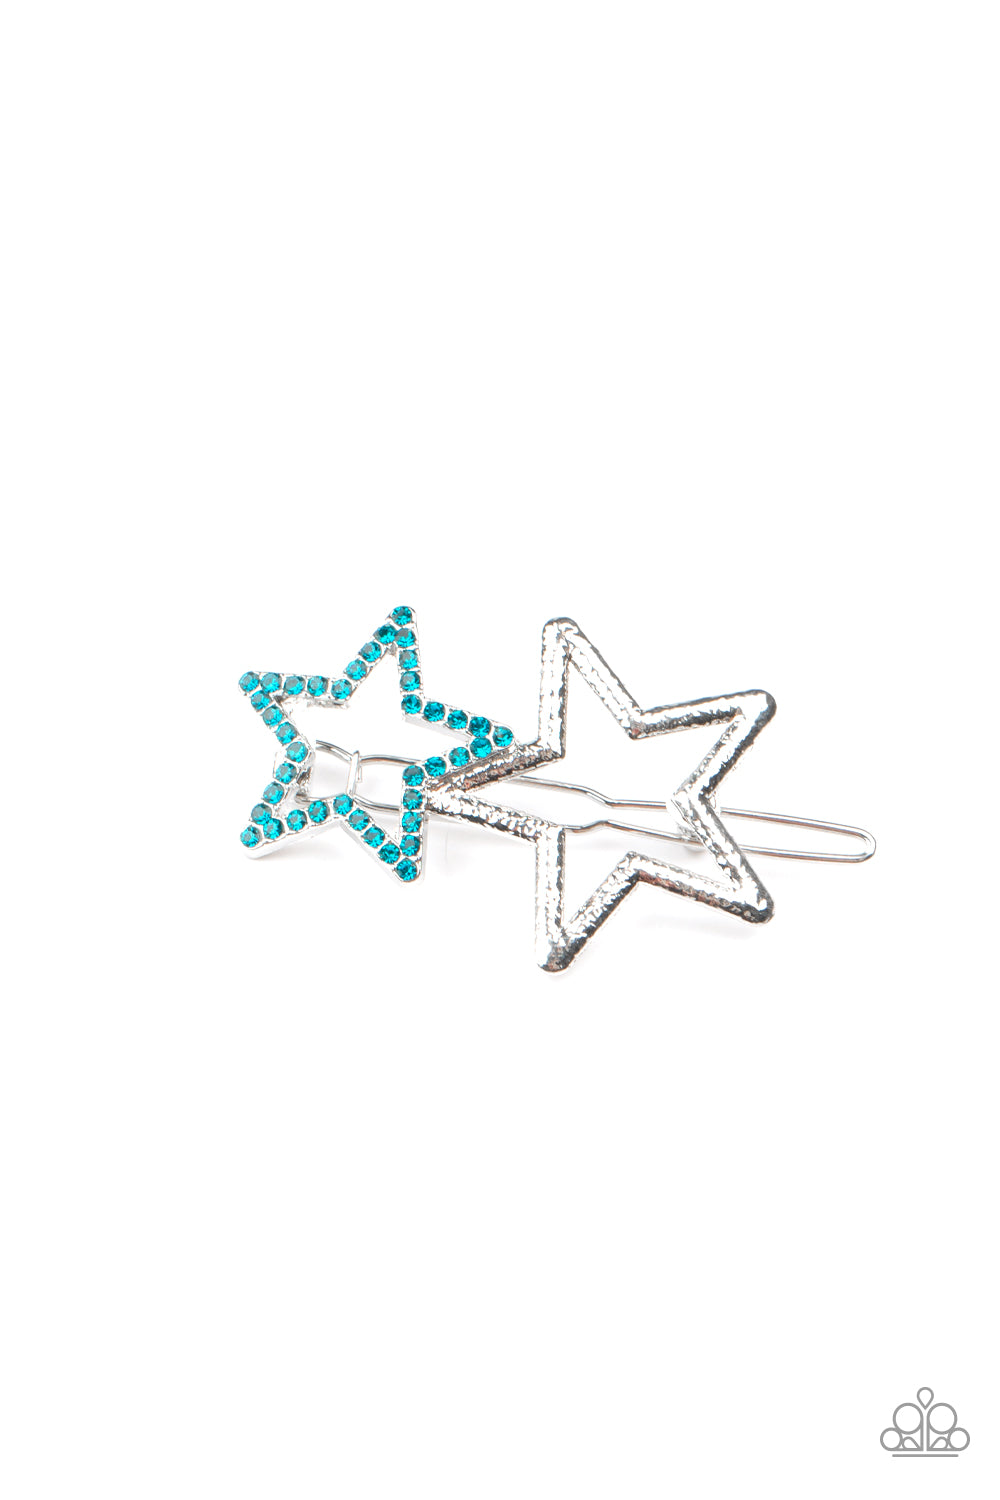 A blue rhinestone encrusted star and hammered silver star join into a star-studded centerpiece for a stellar fashion. Features a clamp barrette closure.